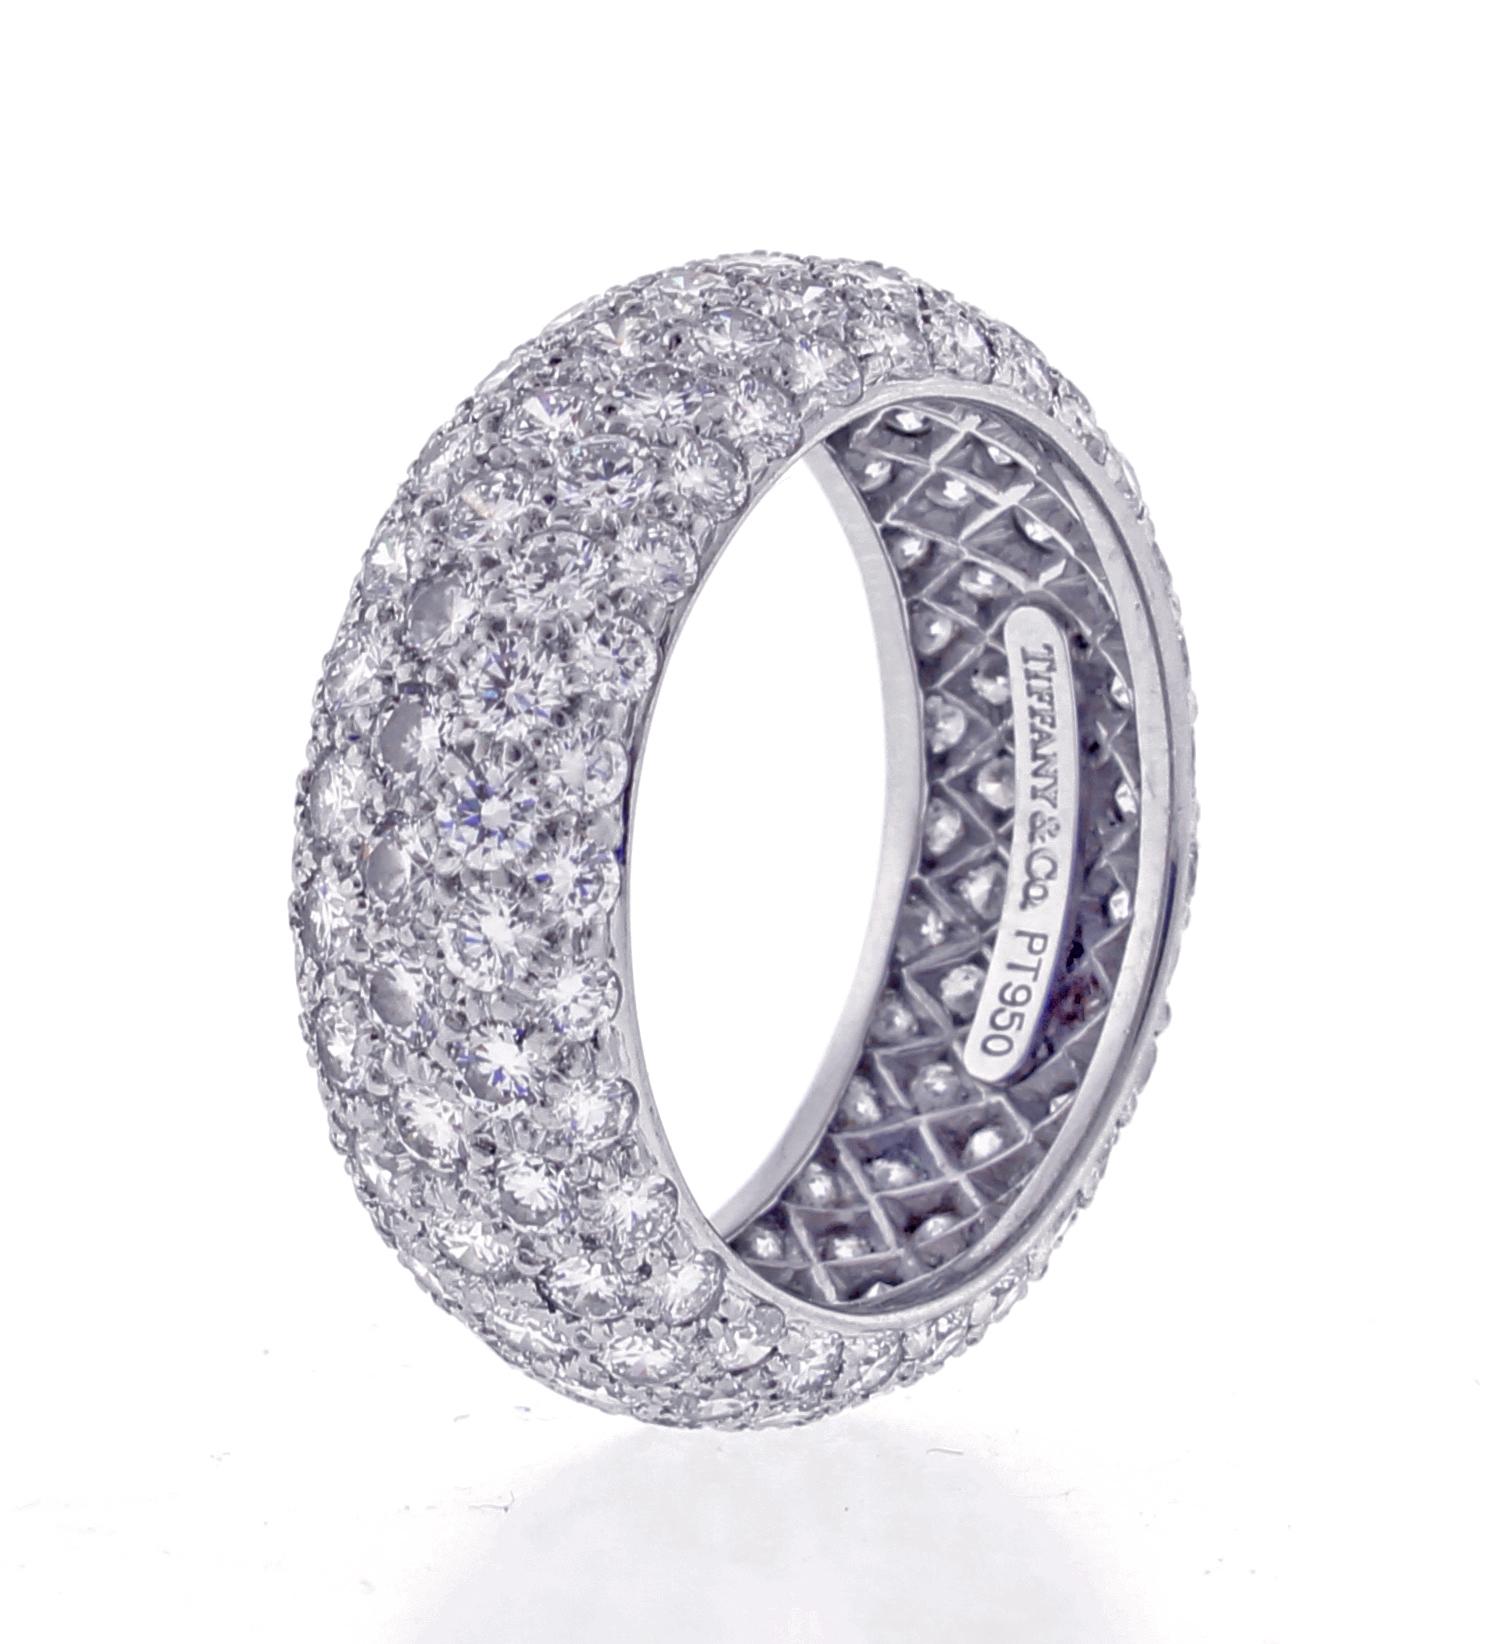 From Tiffany & Co. Etoile collection, thier five-row band ring with round brilliant diamonds pavé-set in platinum.
♦ Designer:Tiffany & Co
♦ Metal:Platinum
♦ Gem stone: Diamonds = 3.75 carat E-F color VVS
♦ 7½mm wide
♦ Circa 2018
♦ Size 7, 
♦